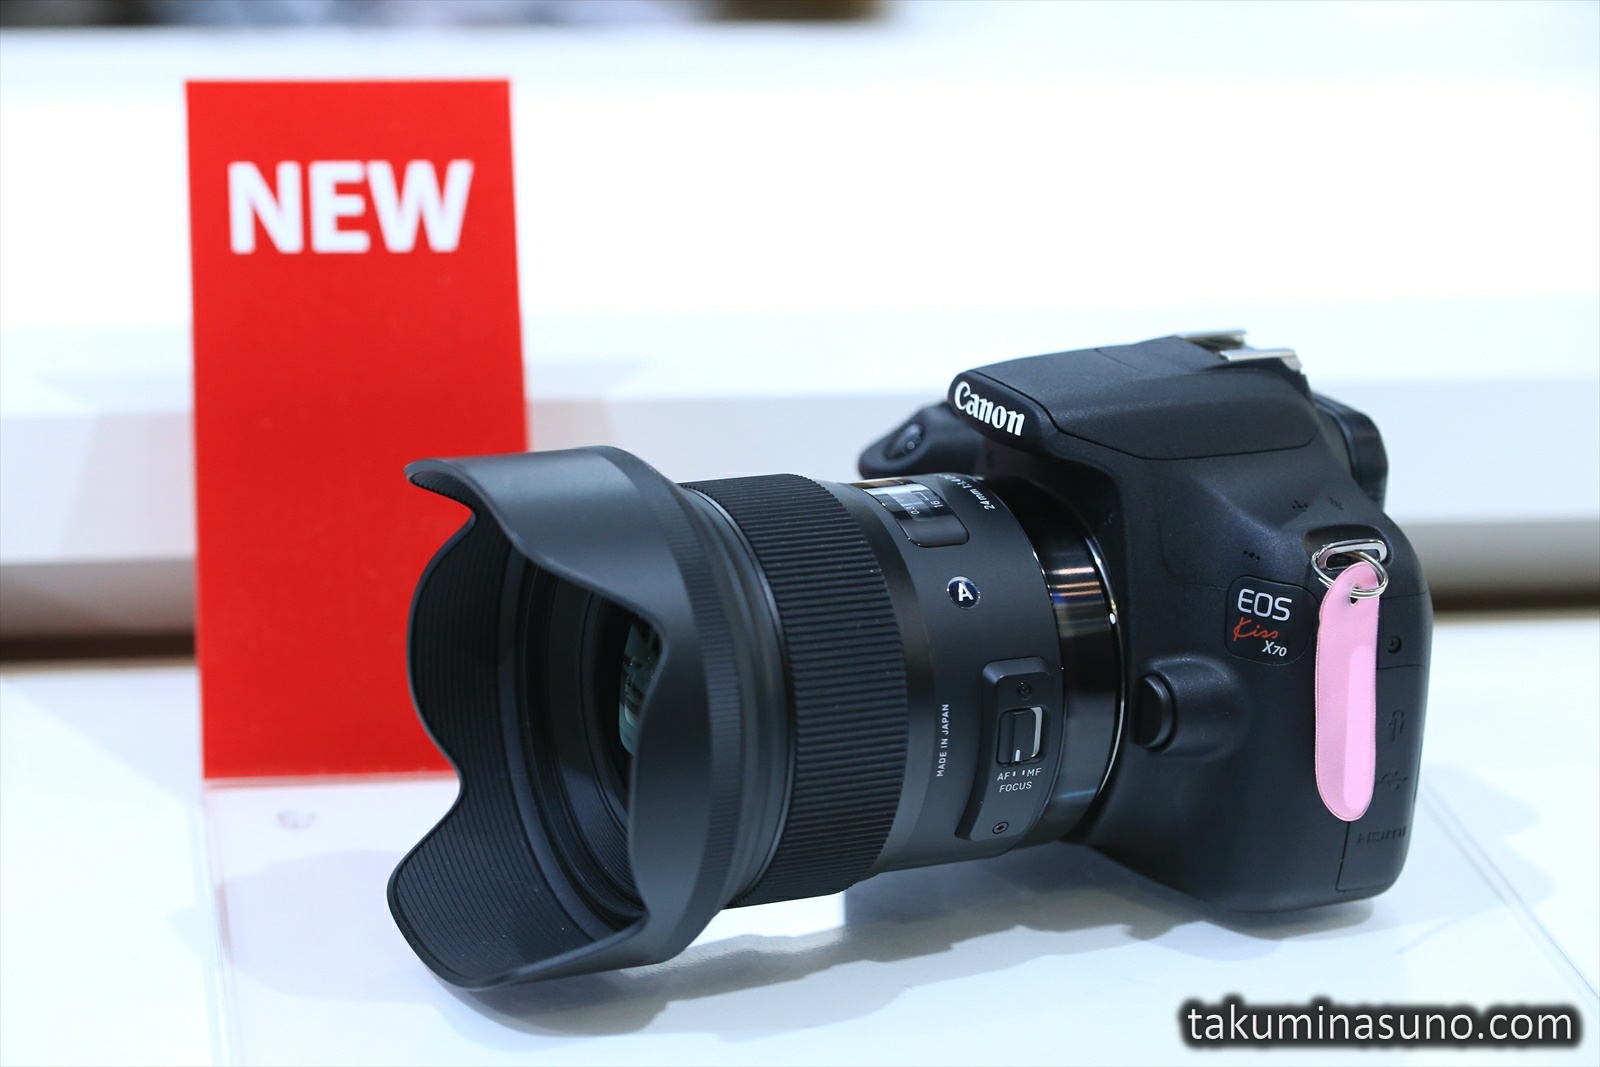 CP+ 2015 - Biggest Finding was not a New Body or Lens, But. . . - 10